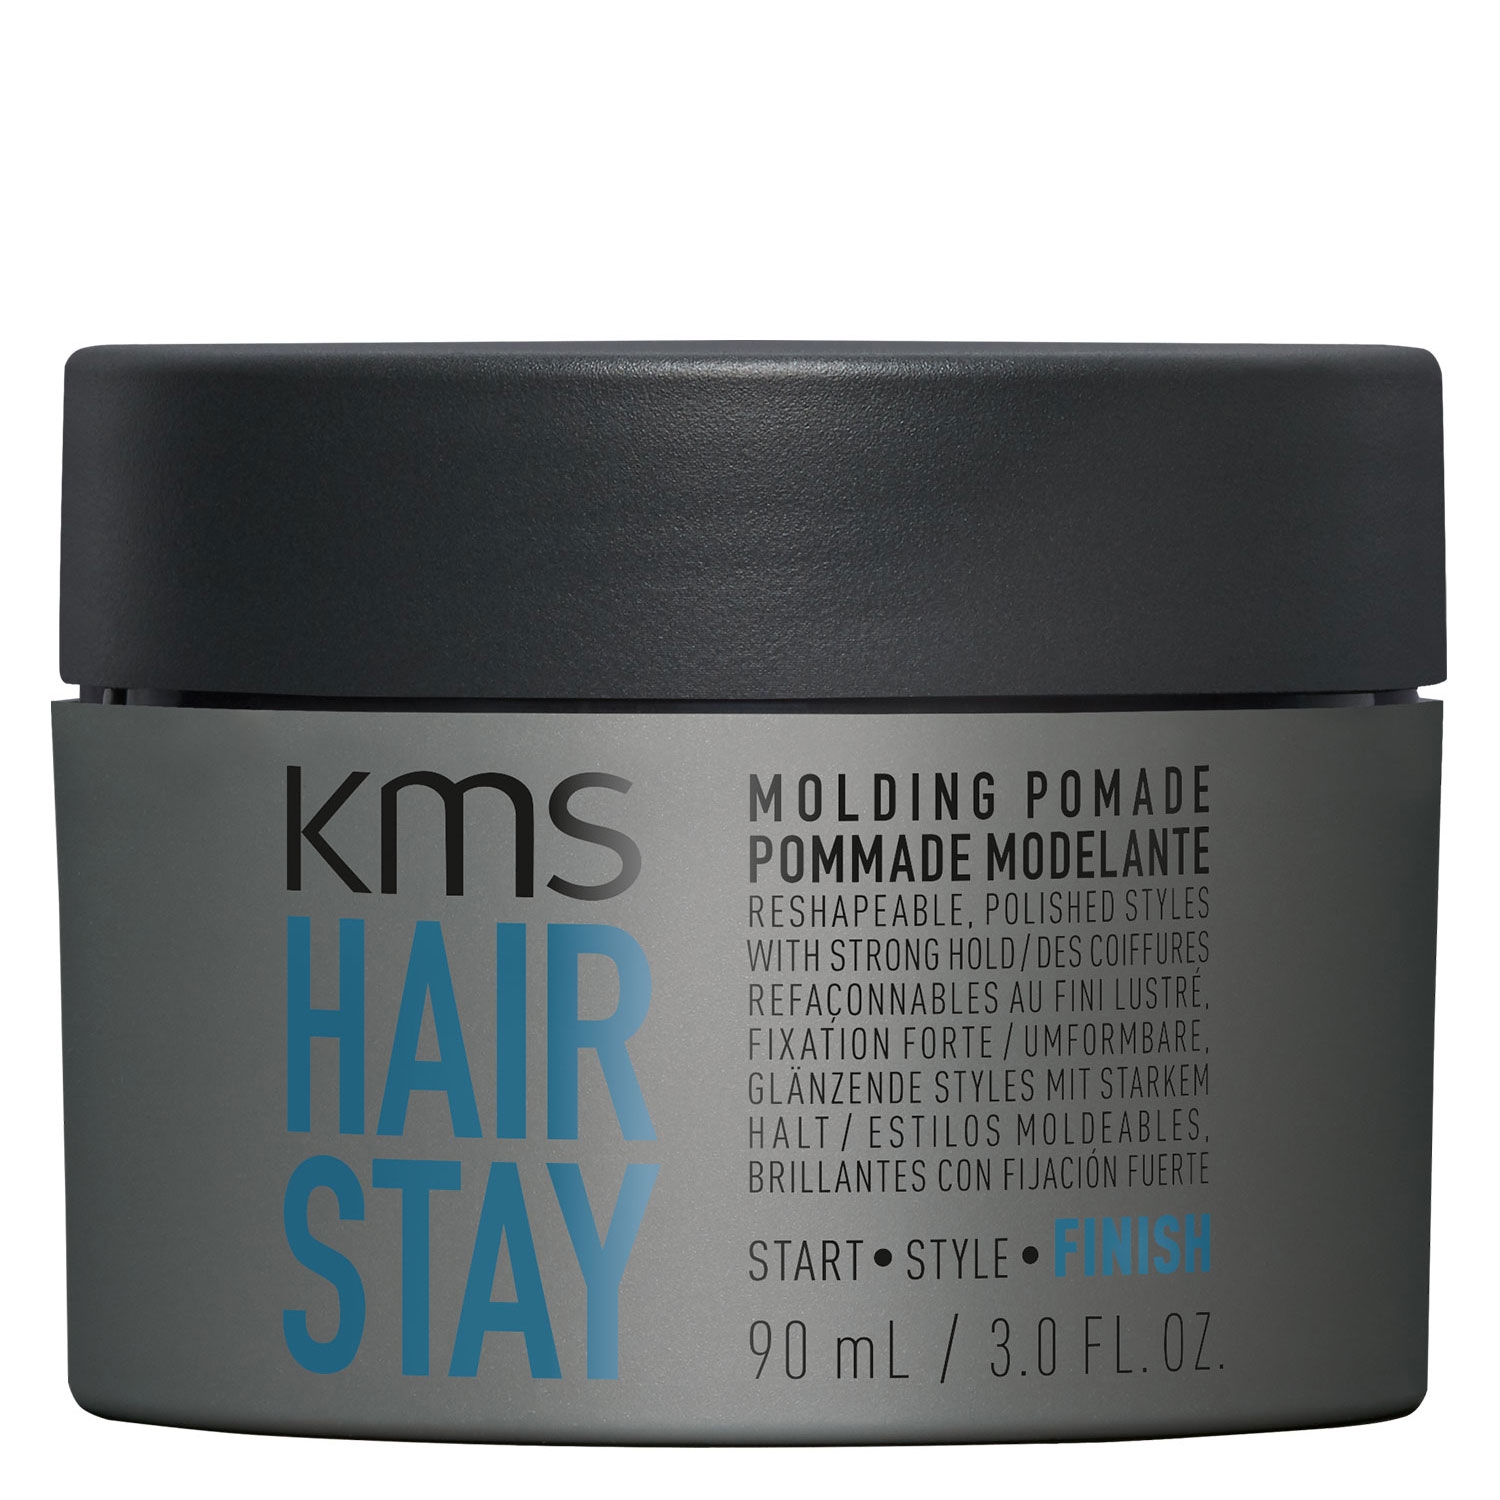 Product image from Hairstay - Molding Pomade